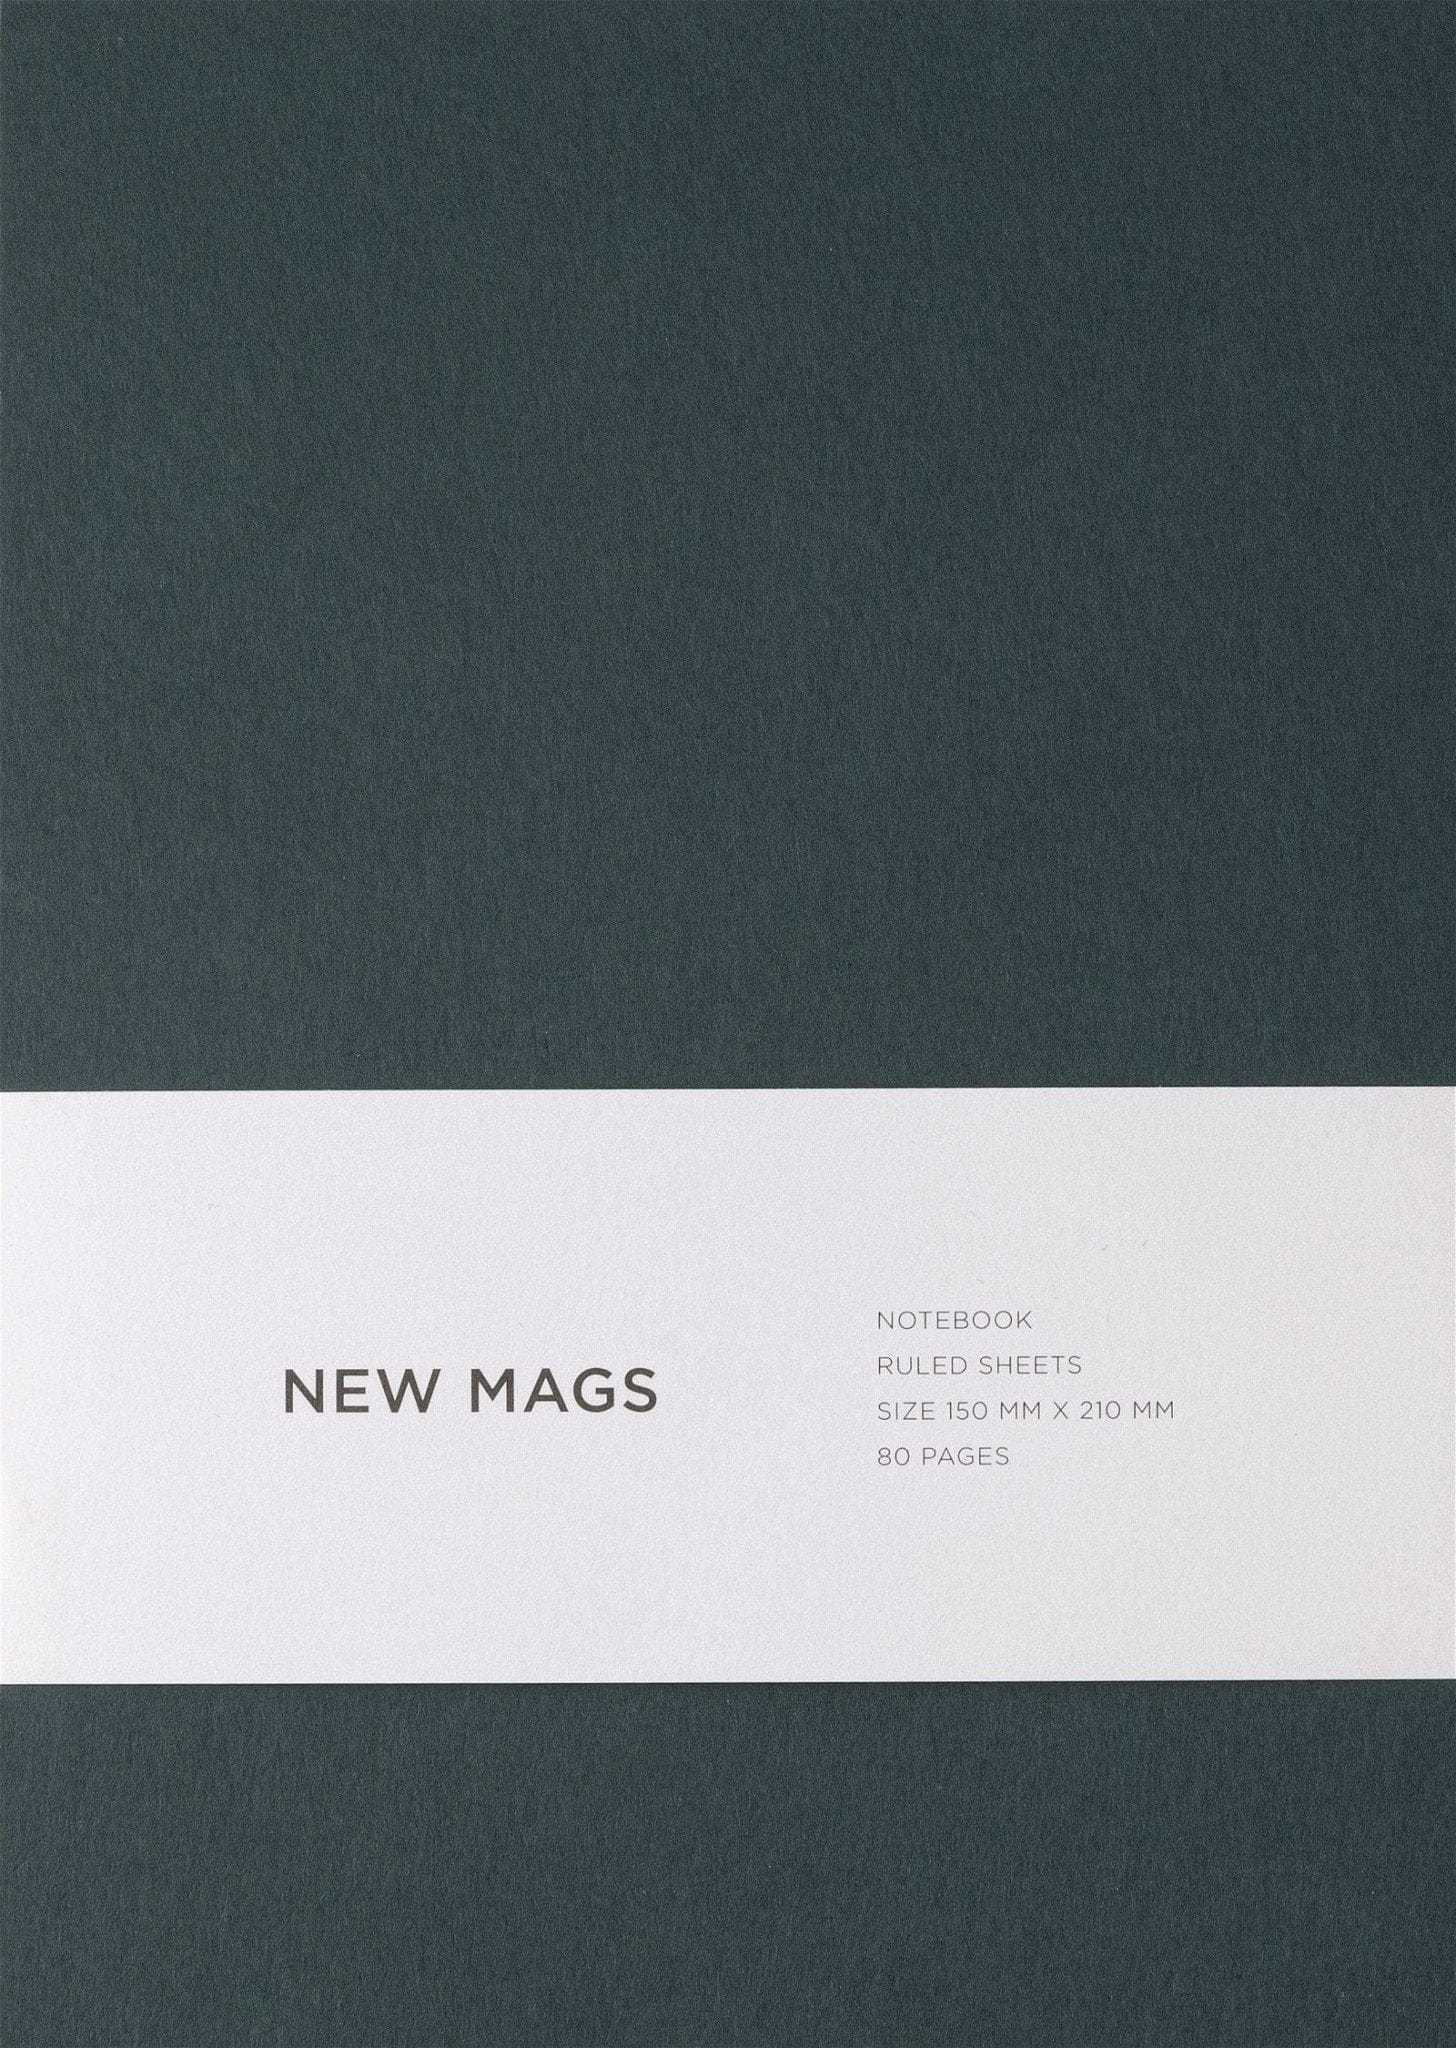 NewMags Agenda Notebook Moss Green - Softcover/Ruled, in Limba Engleza